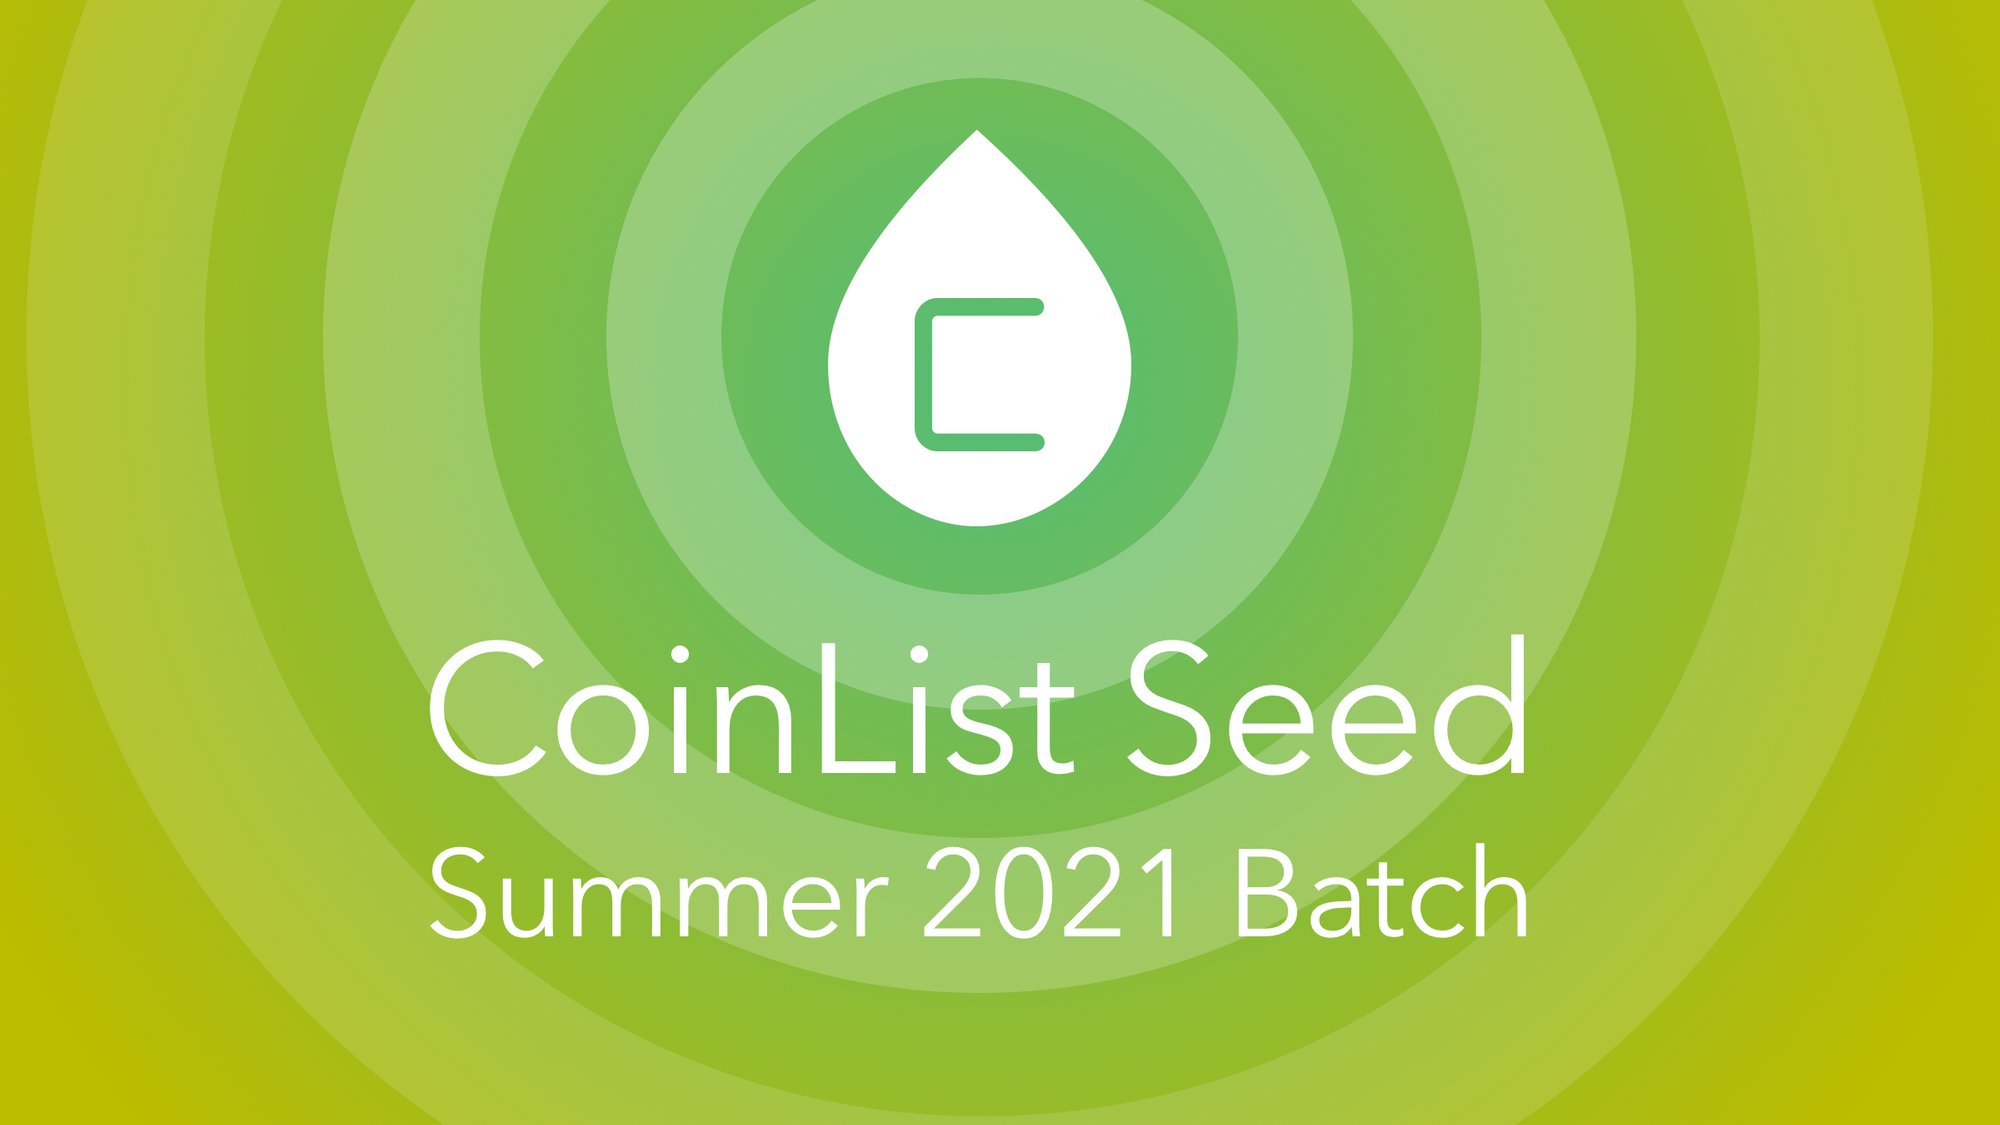 Applications Open for CoinList Seed Summer 2021 Batch